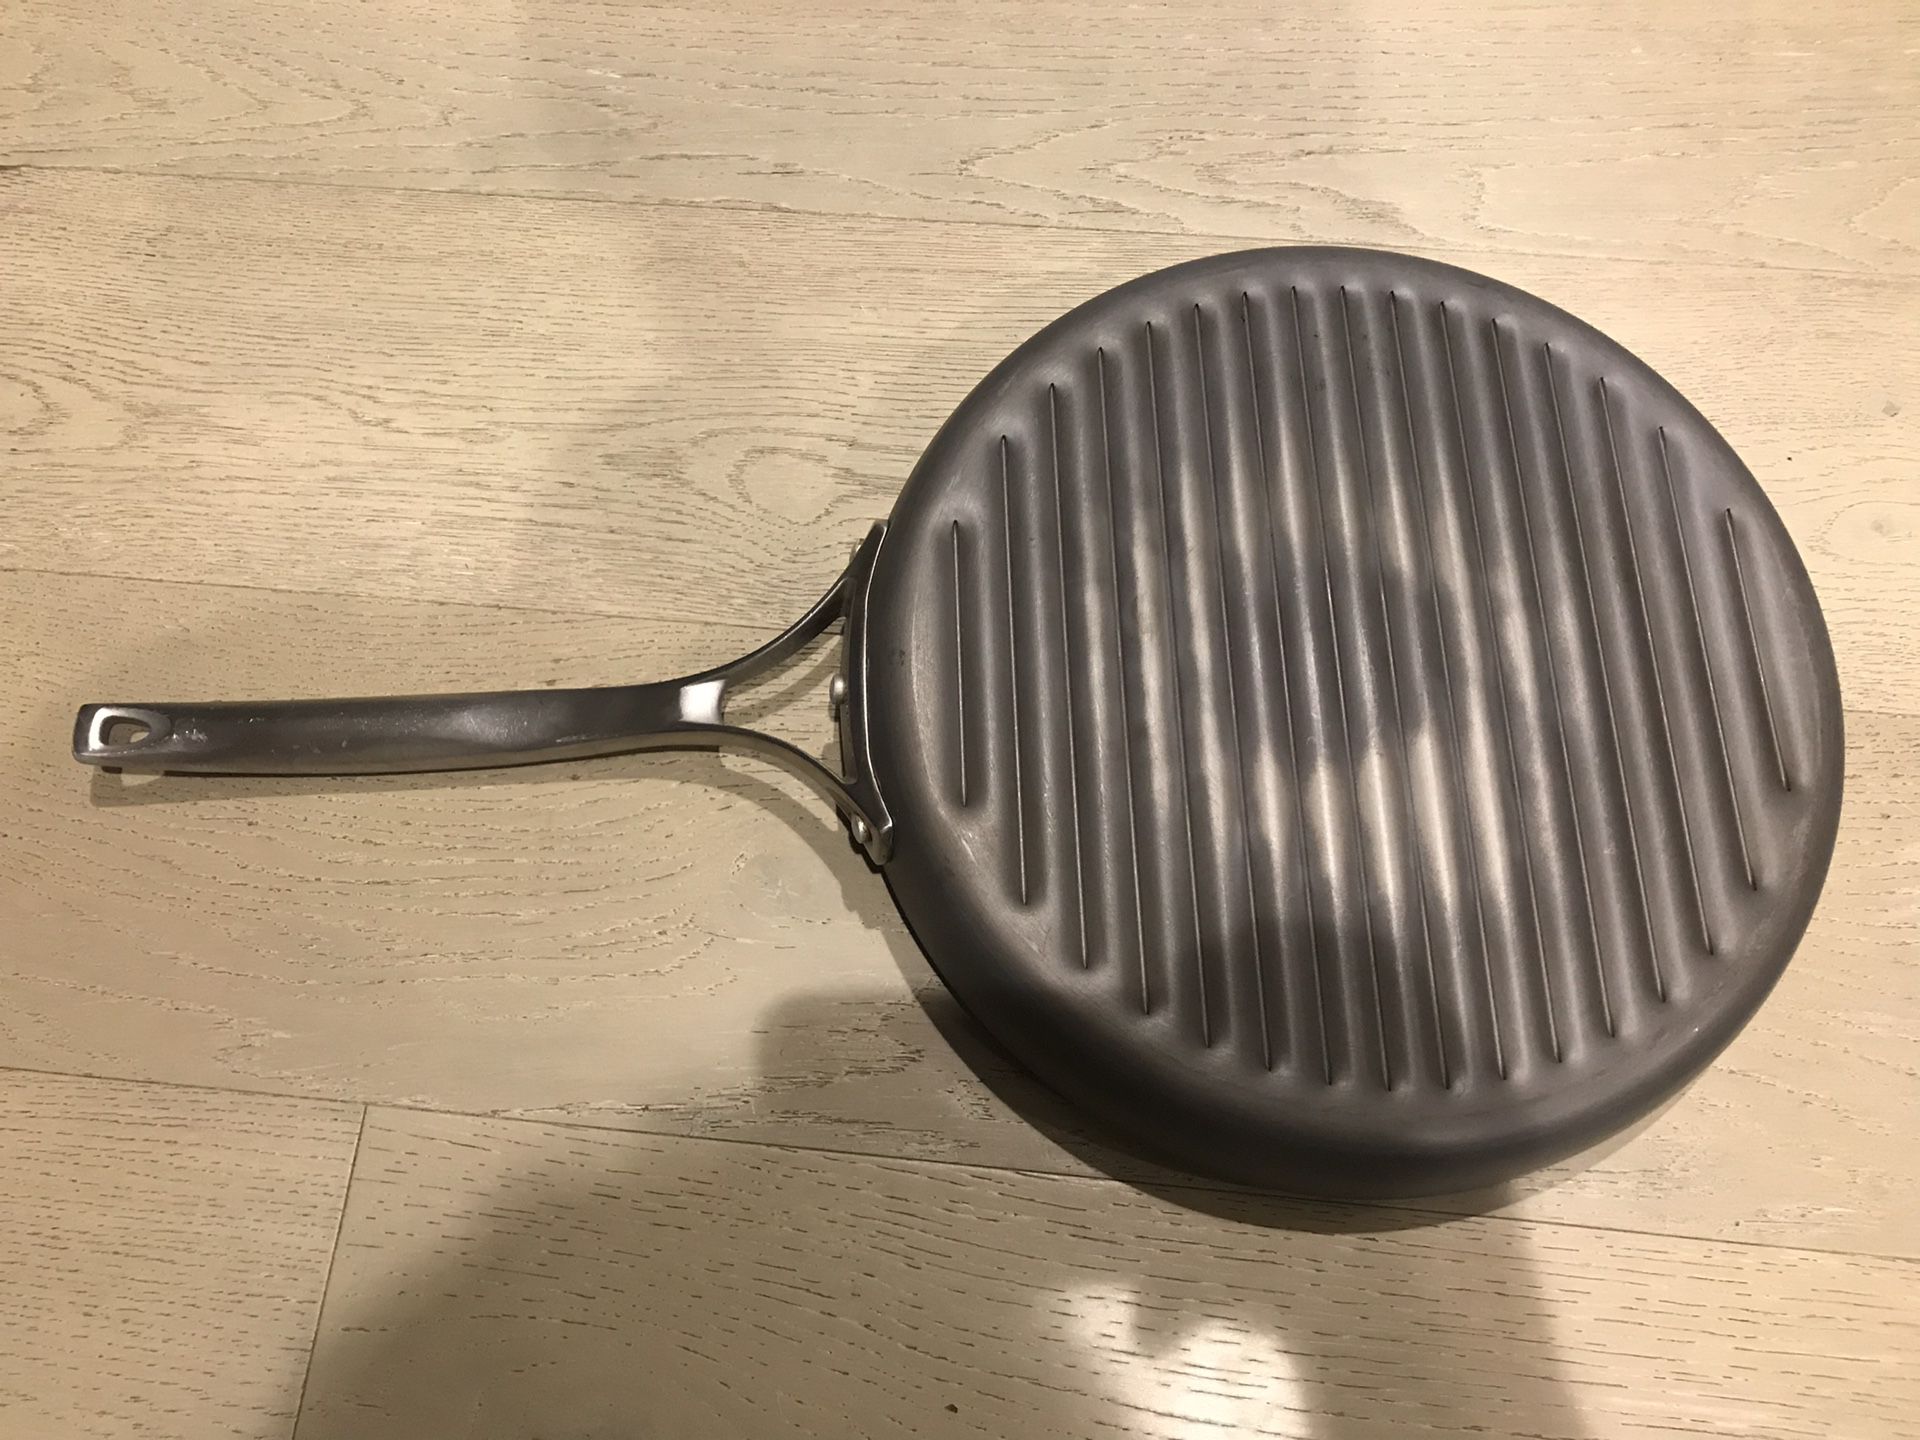 Calphalon 11 Square GRILL PAN nonstick for Sale in Palm Harbor, FL -  OfferUp